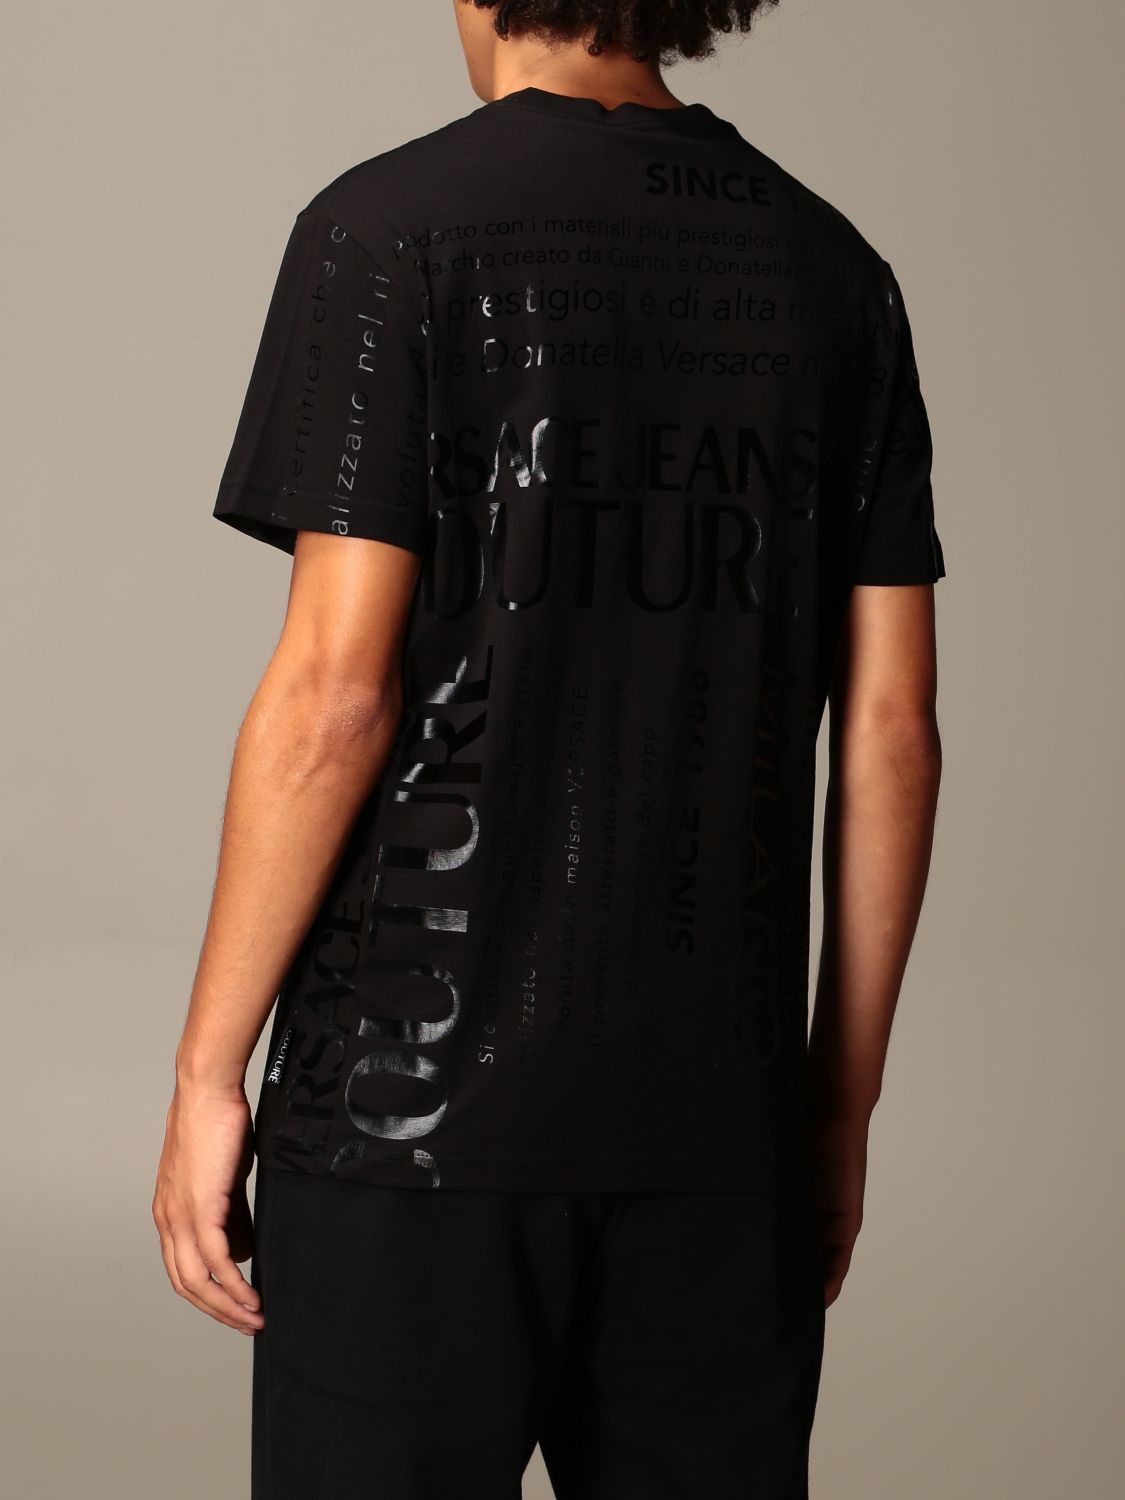 VERSACE JEANS COUTURE: T-shirt with all over logo - Black 1 | T-Shirt ...